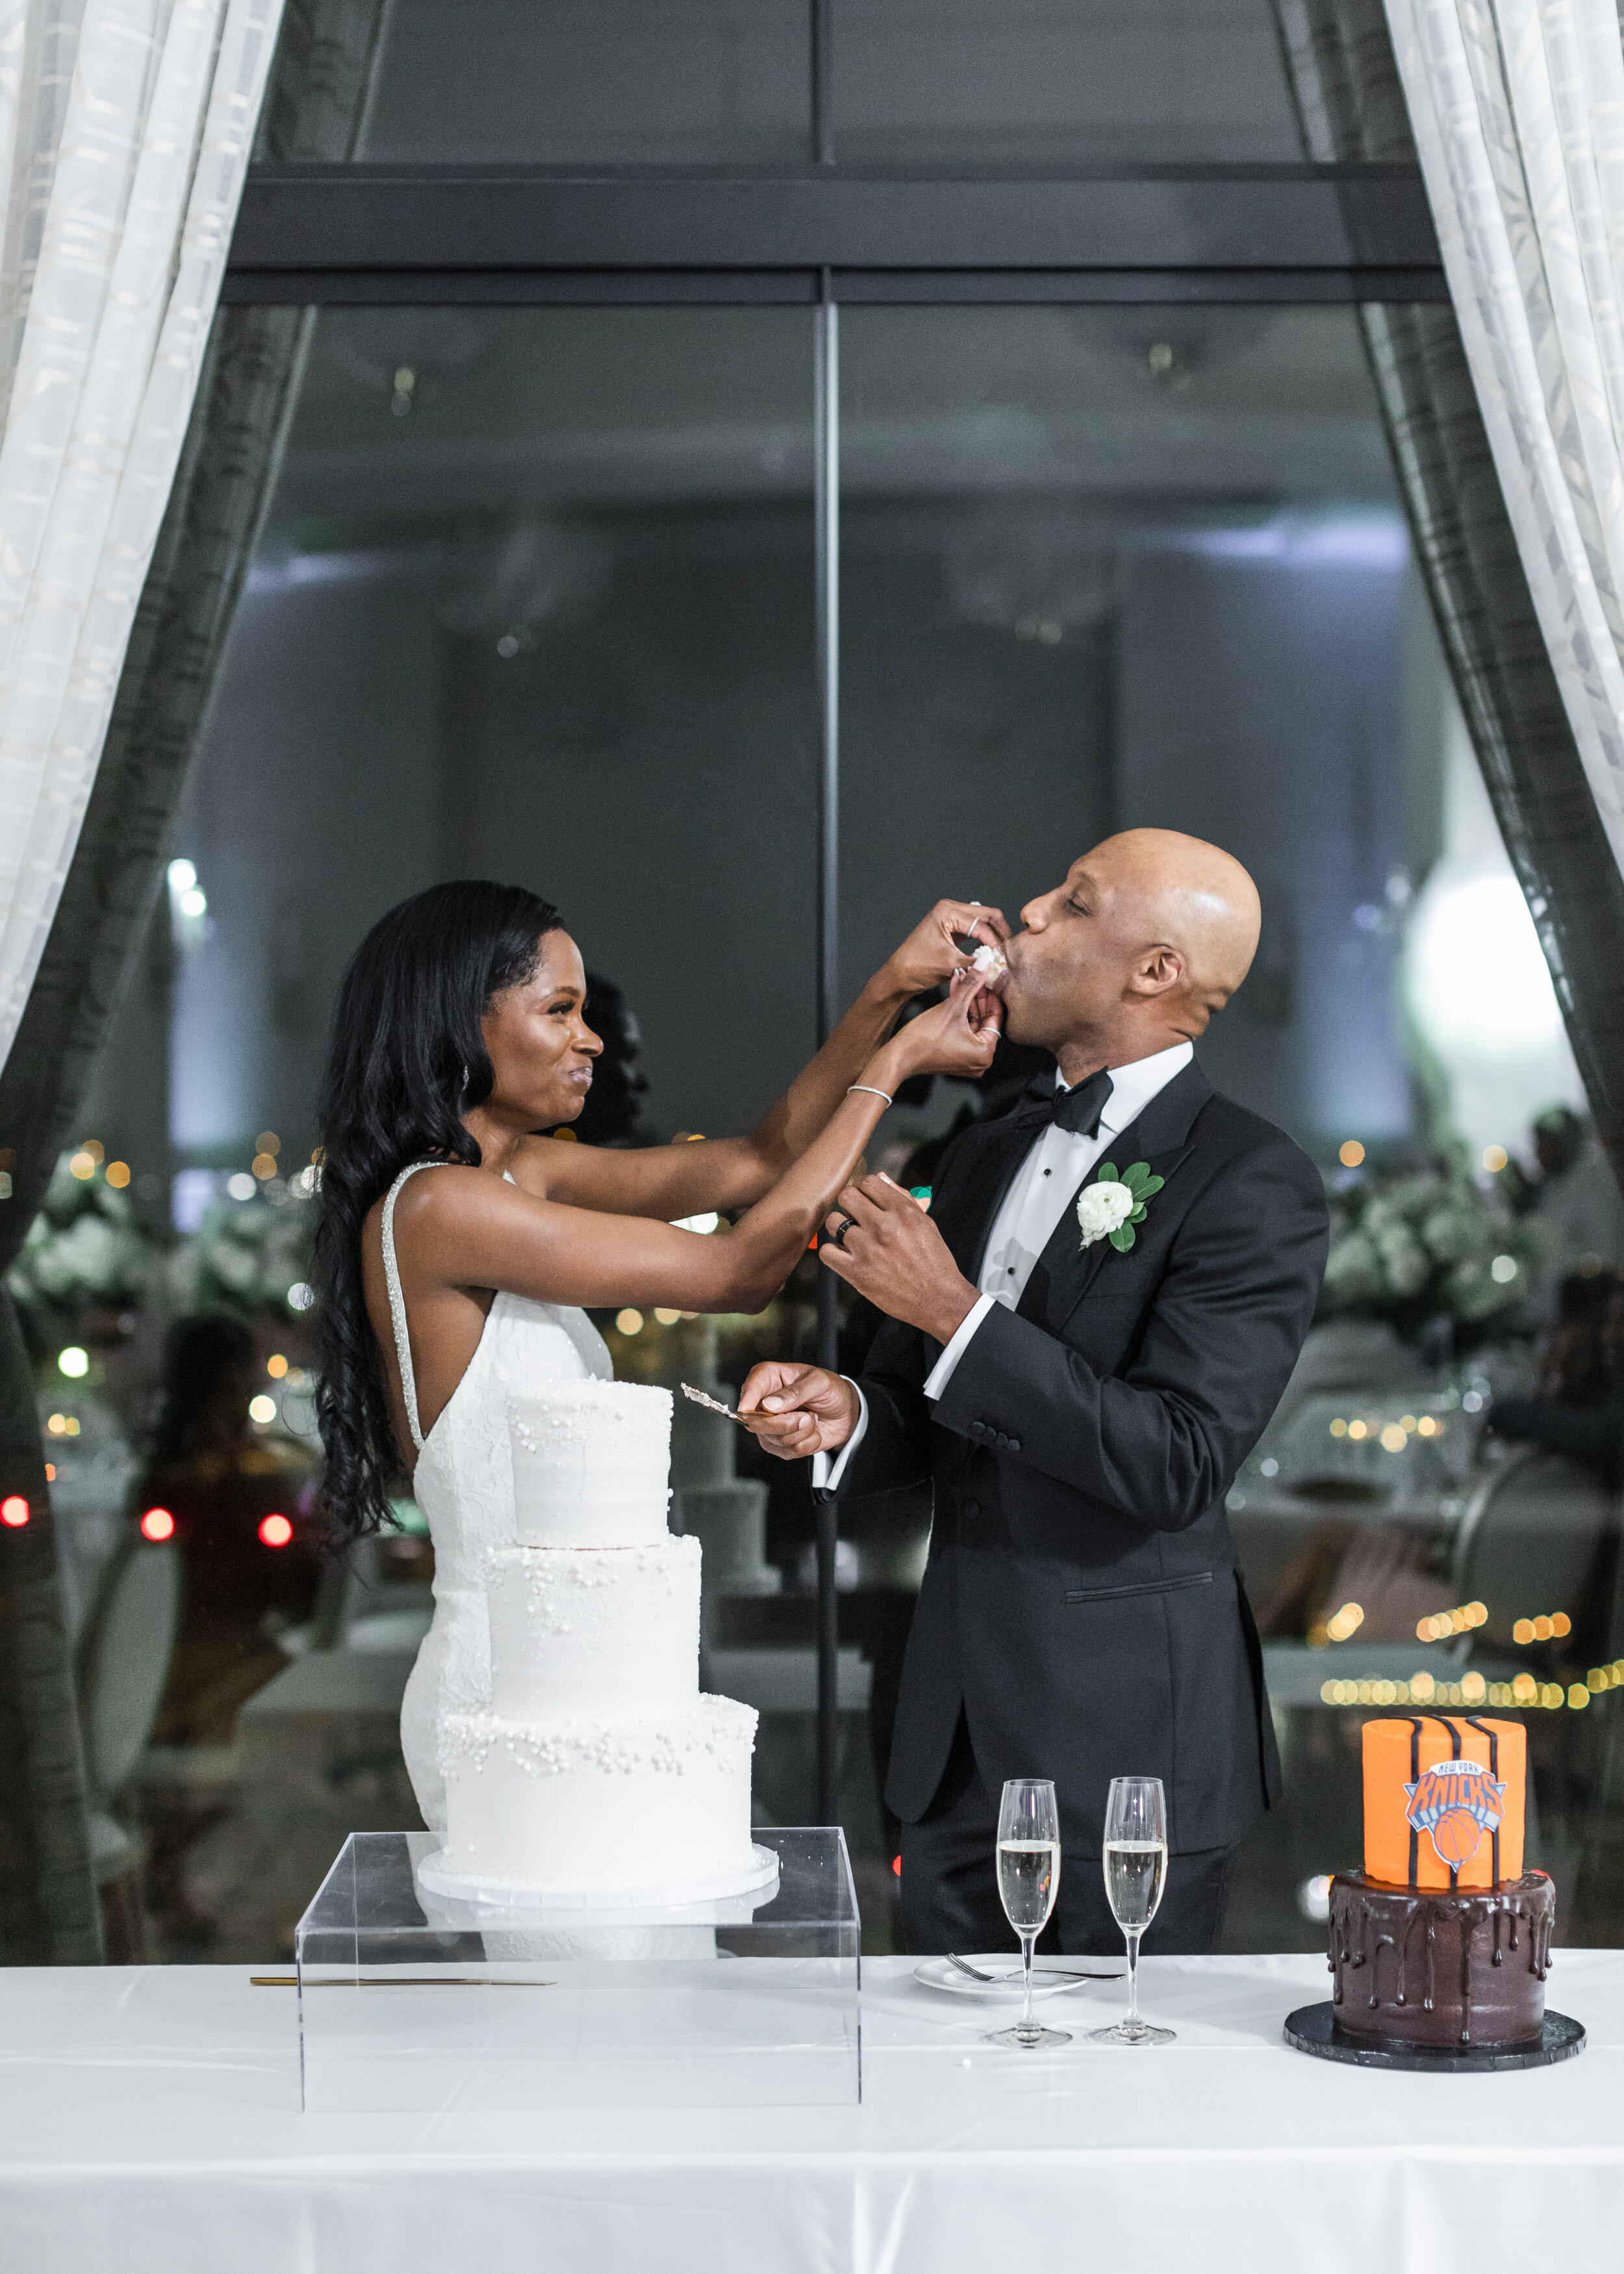  A bride and groom try their wedding cake after the cake cutting. Black and white wedding inspriation white wedding cake wedding cake ideas classy wedding cake elegant wedding details indoor wedding venue hotel vin provo arlington texas photographer 